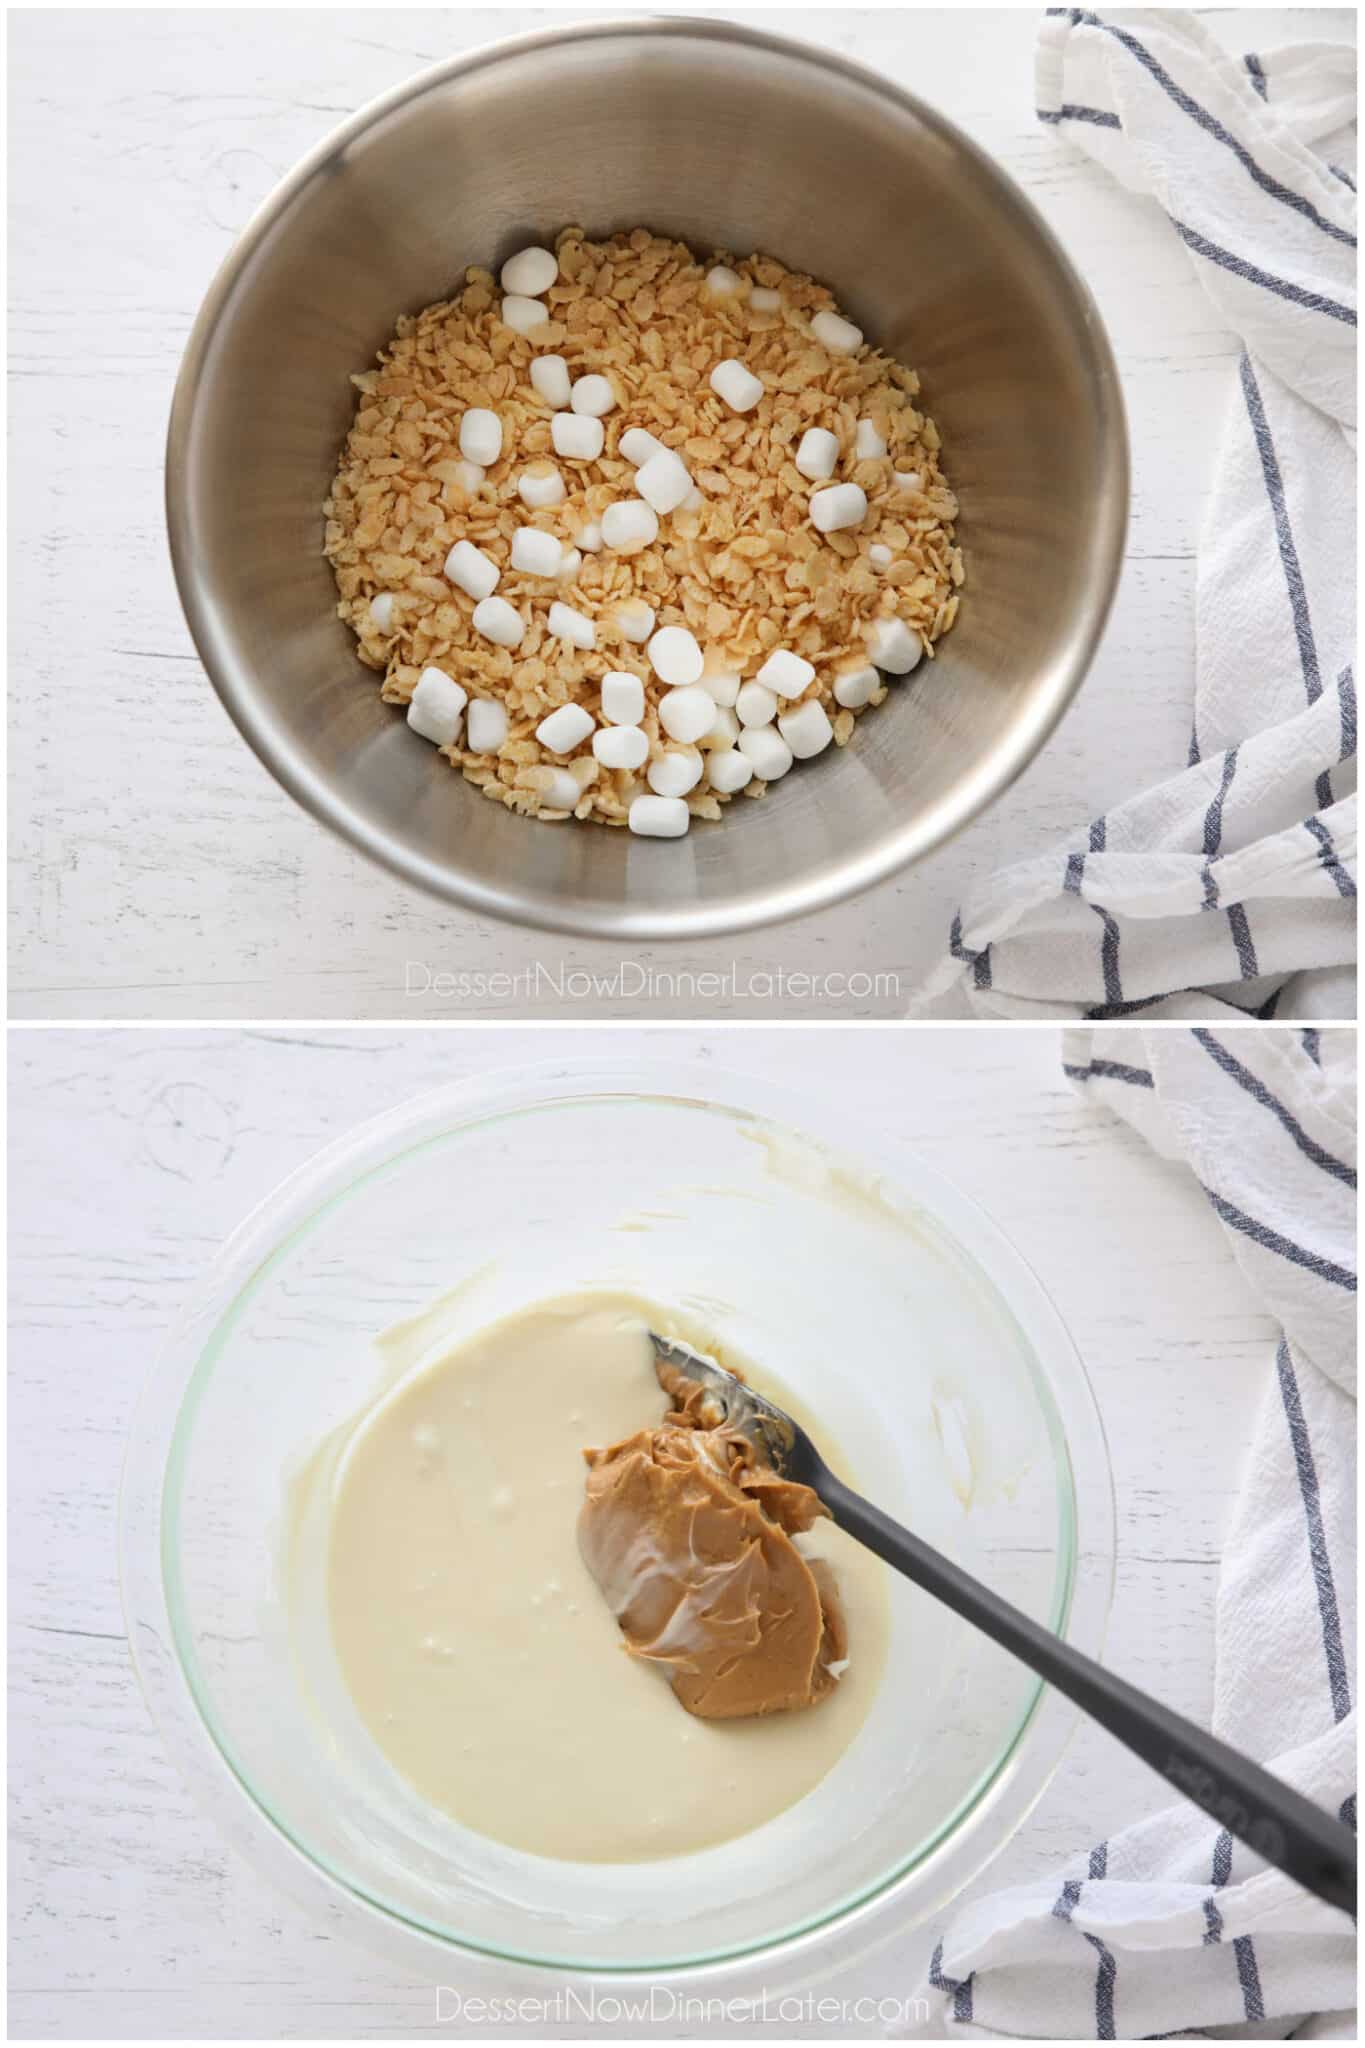 Avalanche Cookies (No-Bake Treat) | Dessert Now Dinner Later